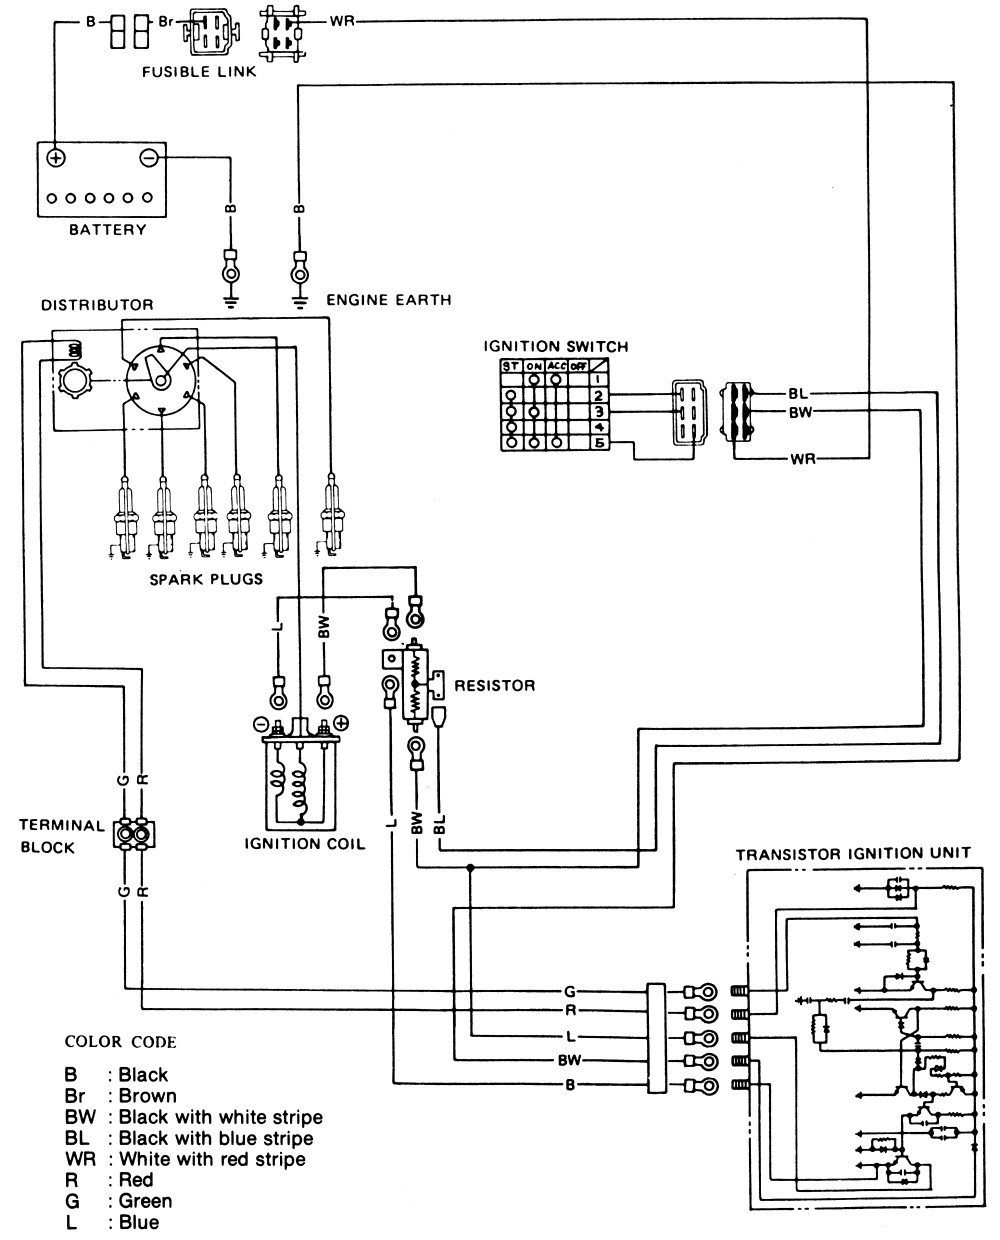 Mopar Electronic Ignition Wiring Diagram Color Electrical Drawing